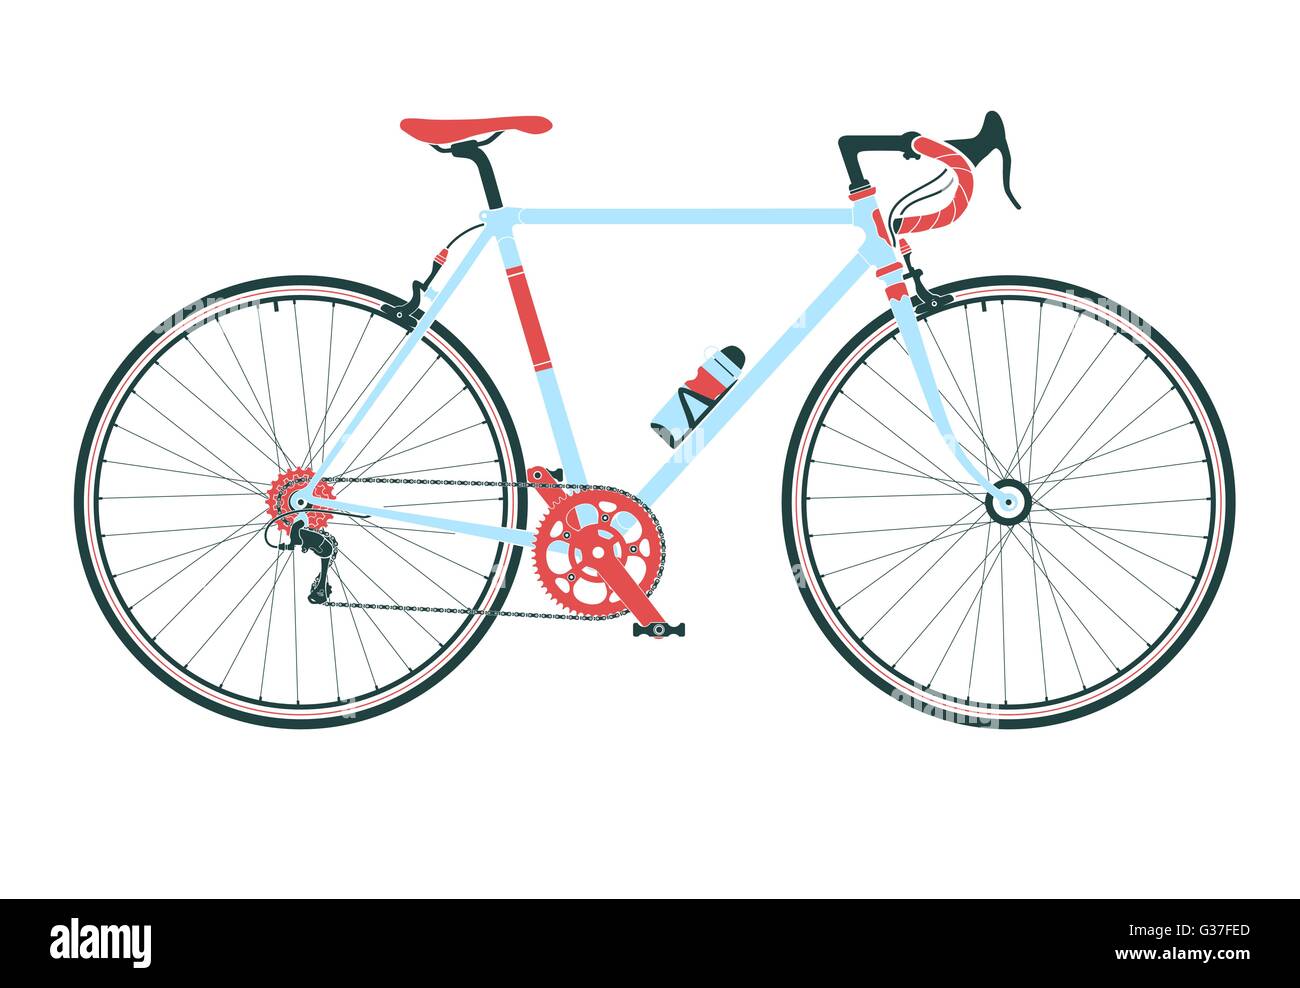 Classic town, road bicycle, detailed vector illustration. Stock Vector